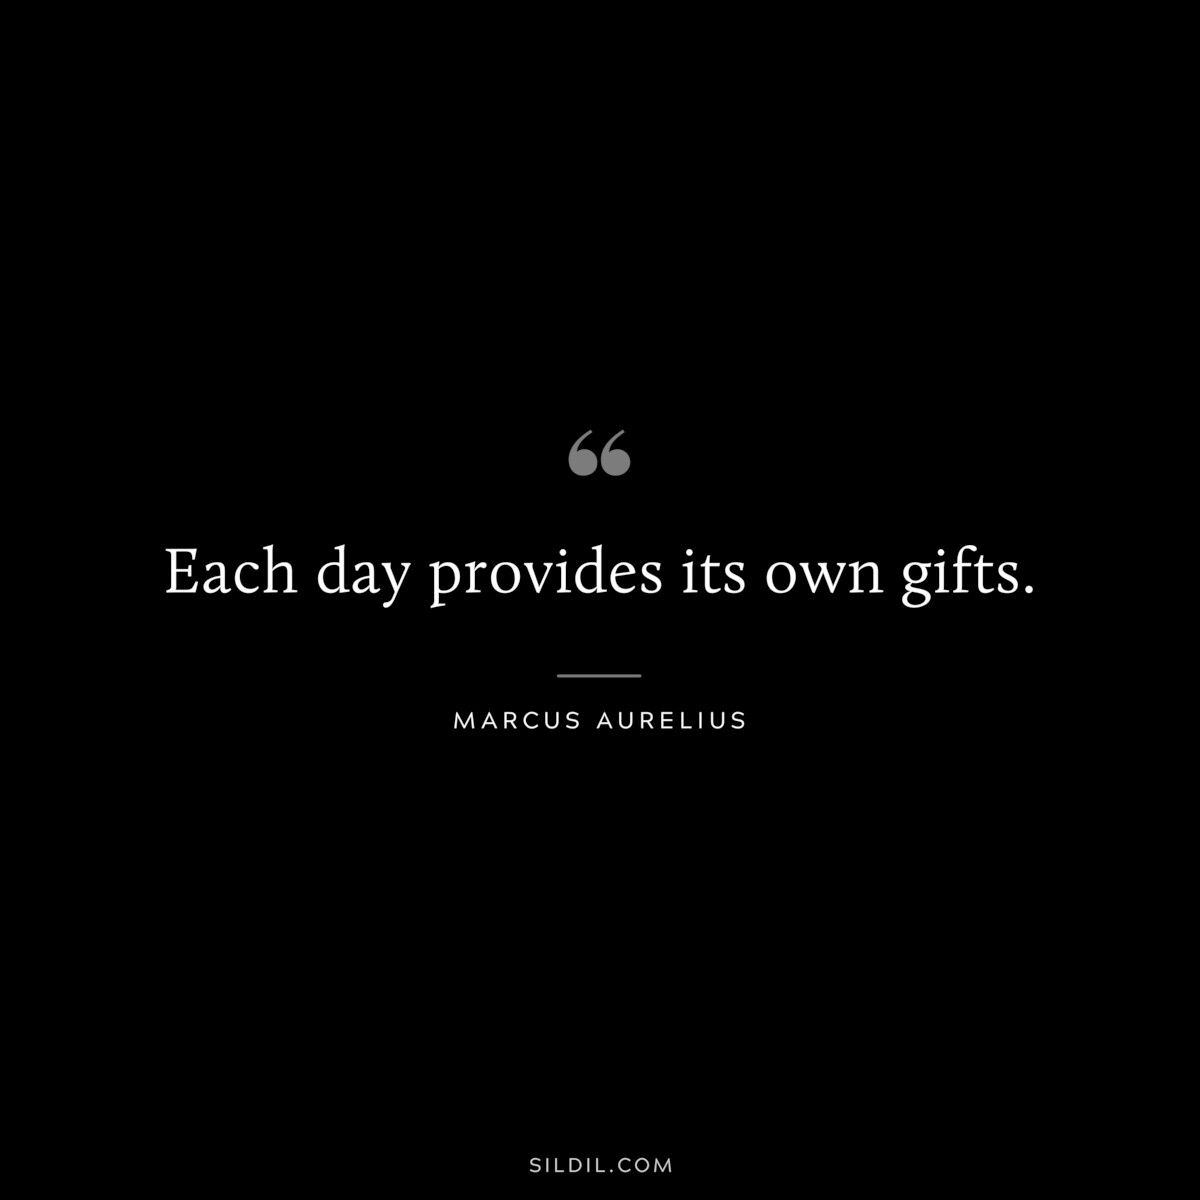 Each day provides its own gifts. ― Marcus Aurelius